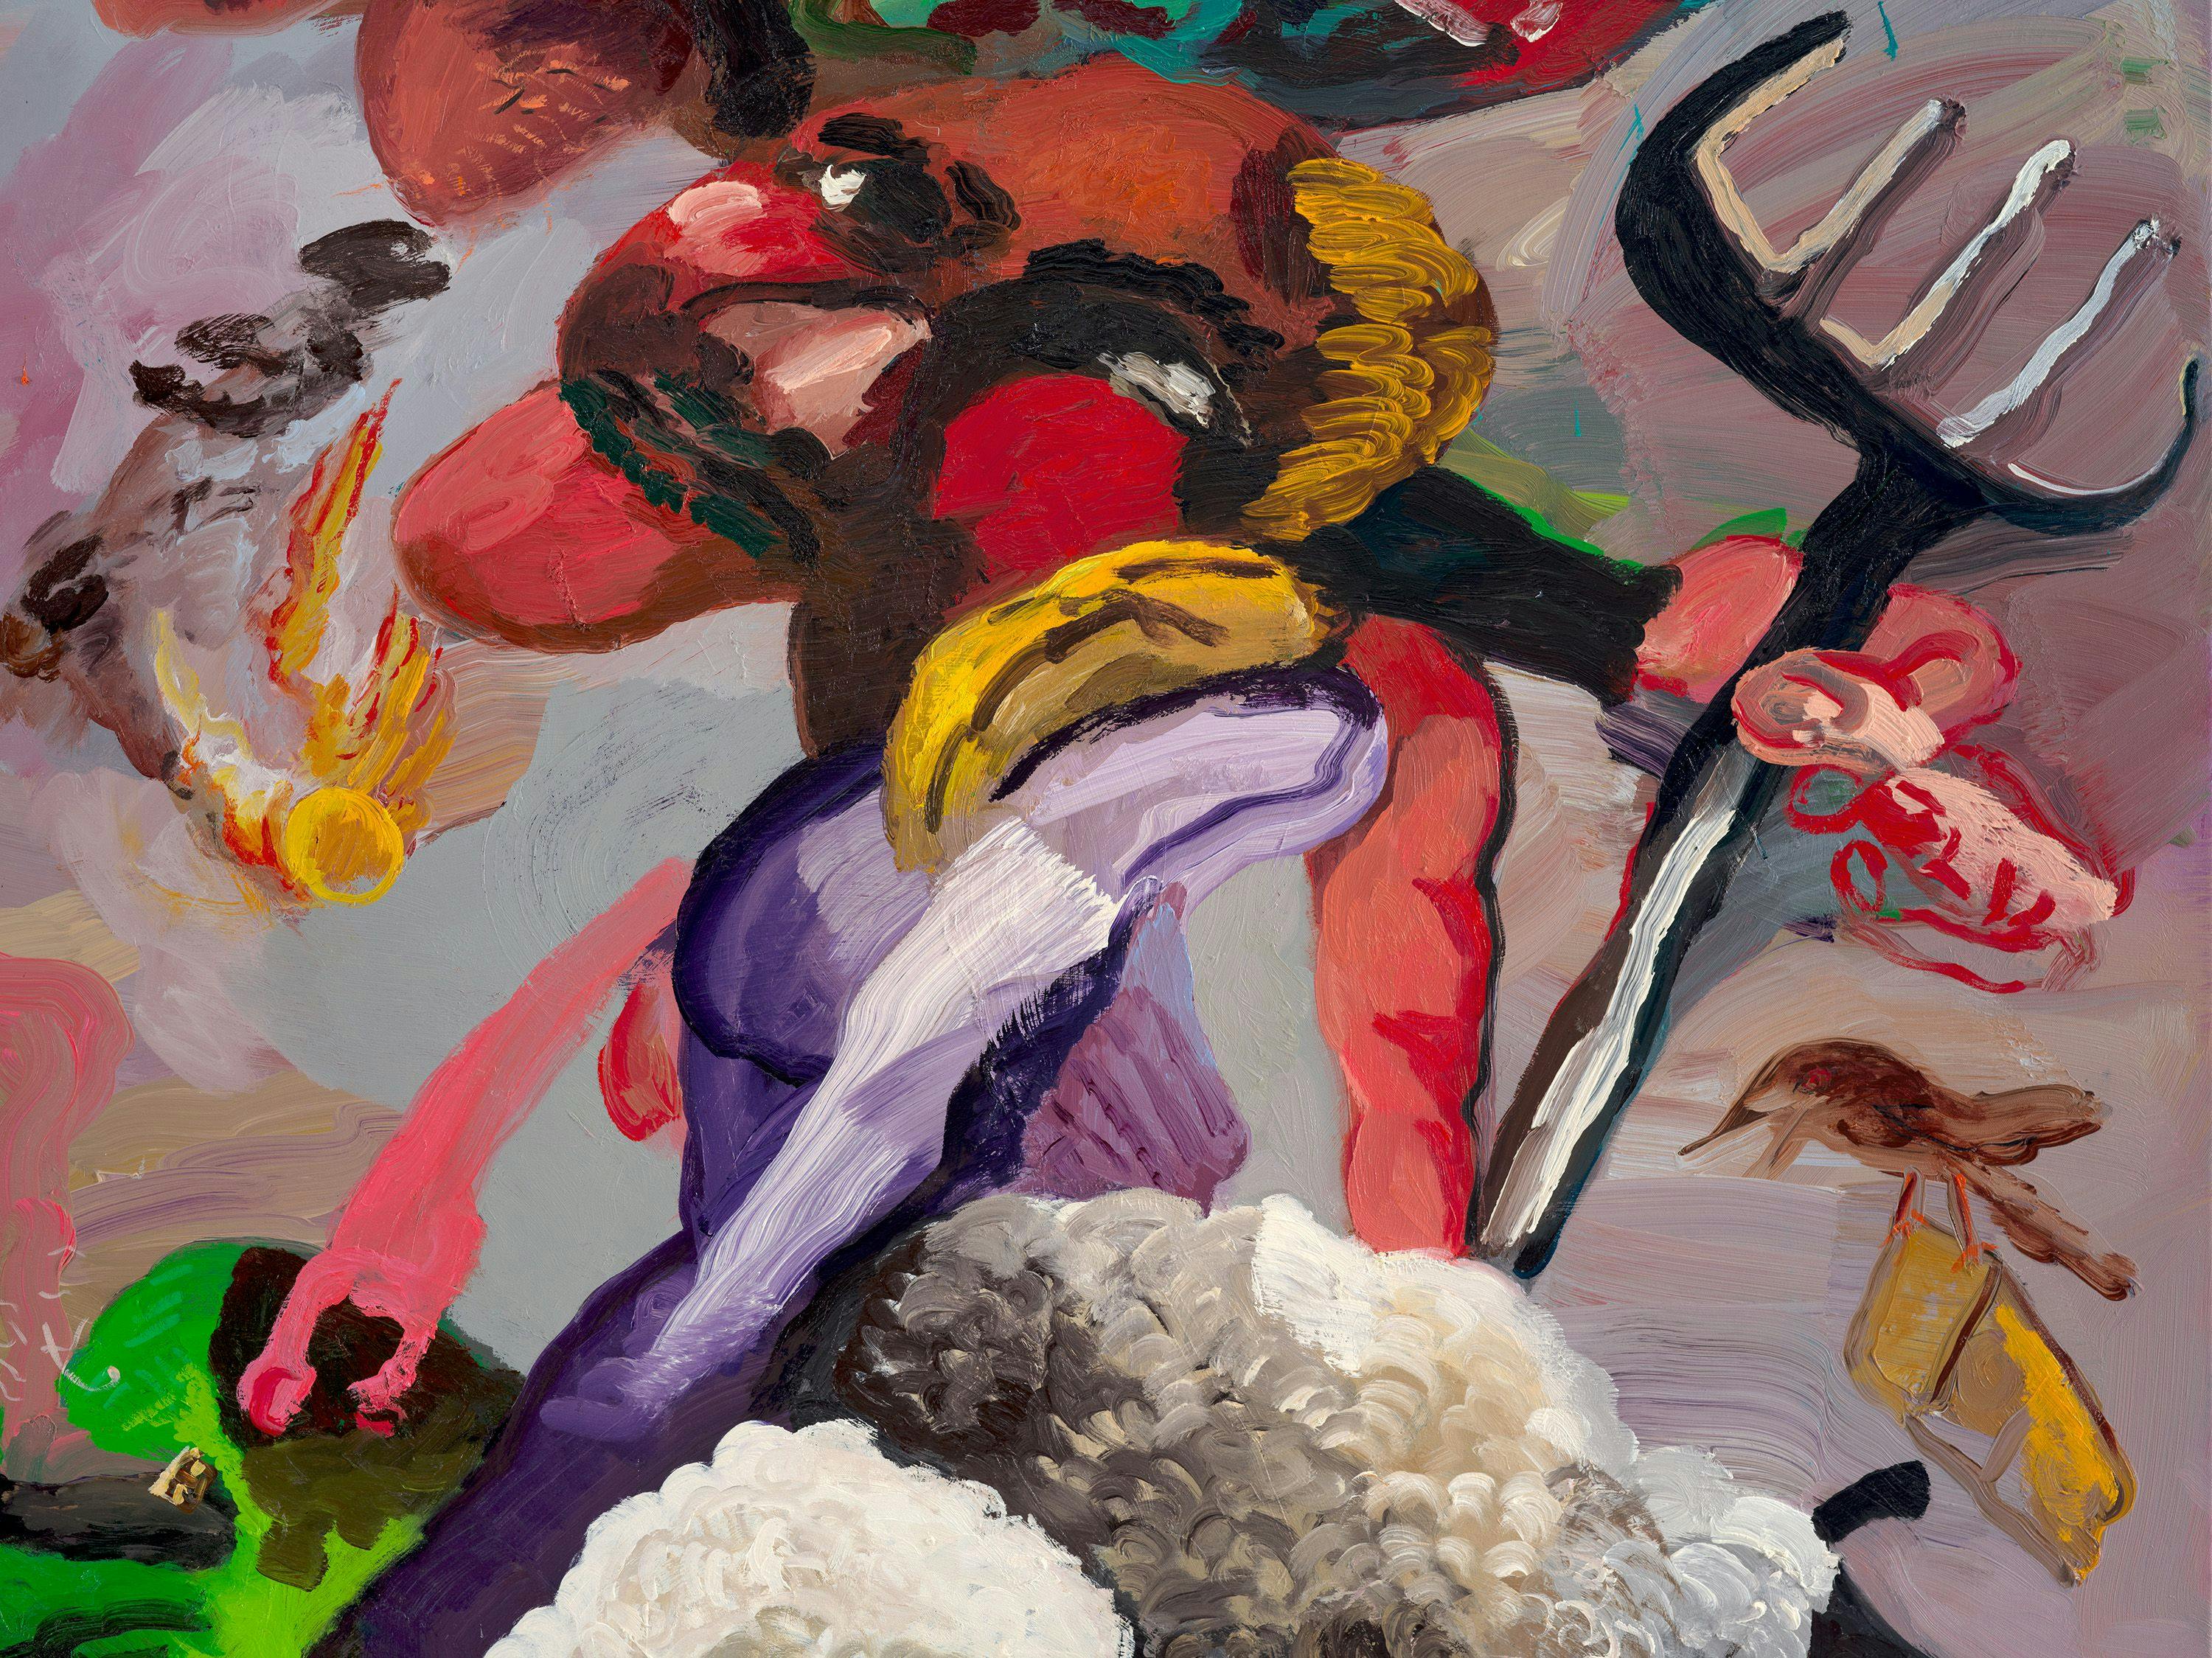 A detail from a painting Dana Schutz, titled ﻿The Island, dated 2023.